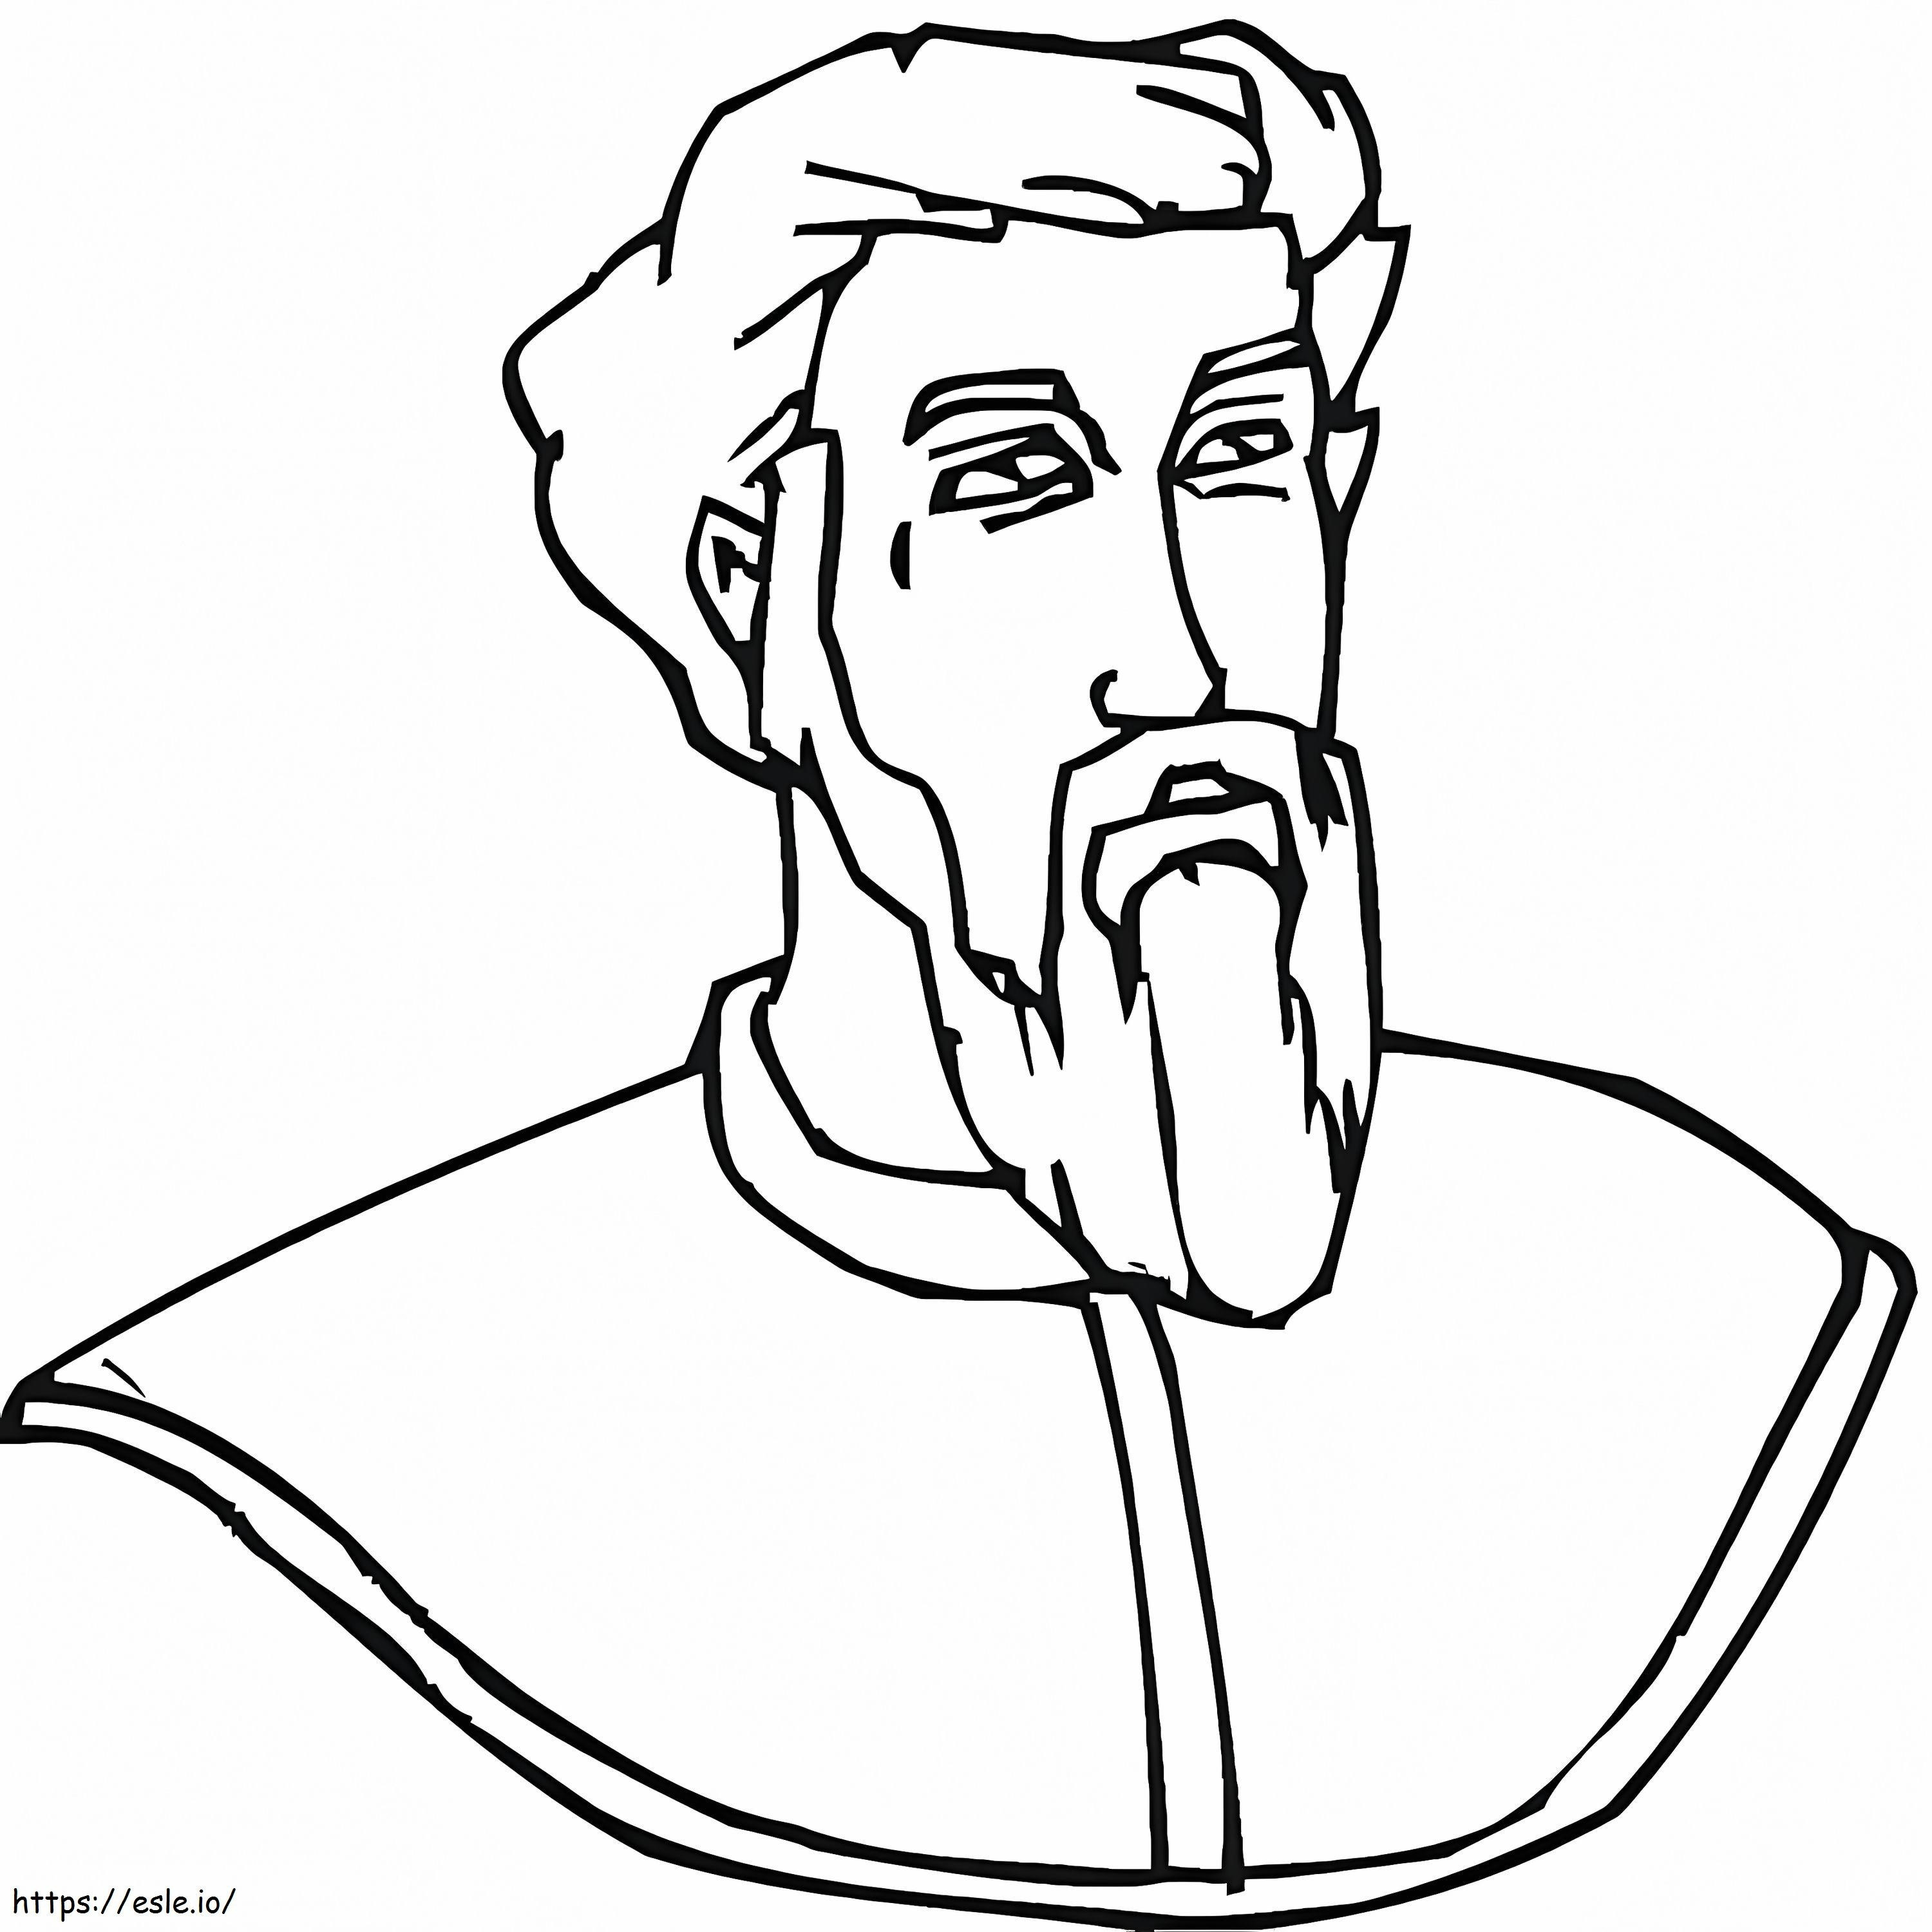 Christopher Columbus 13 coloring page